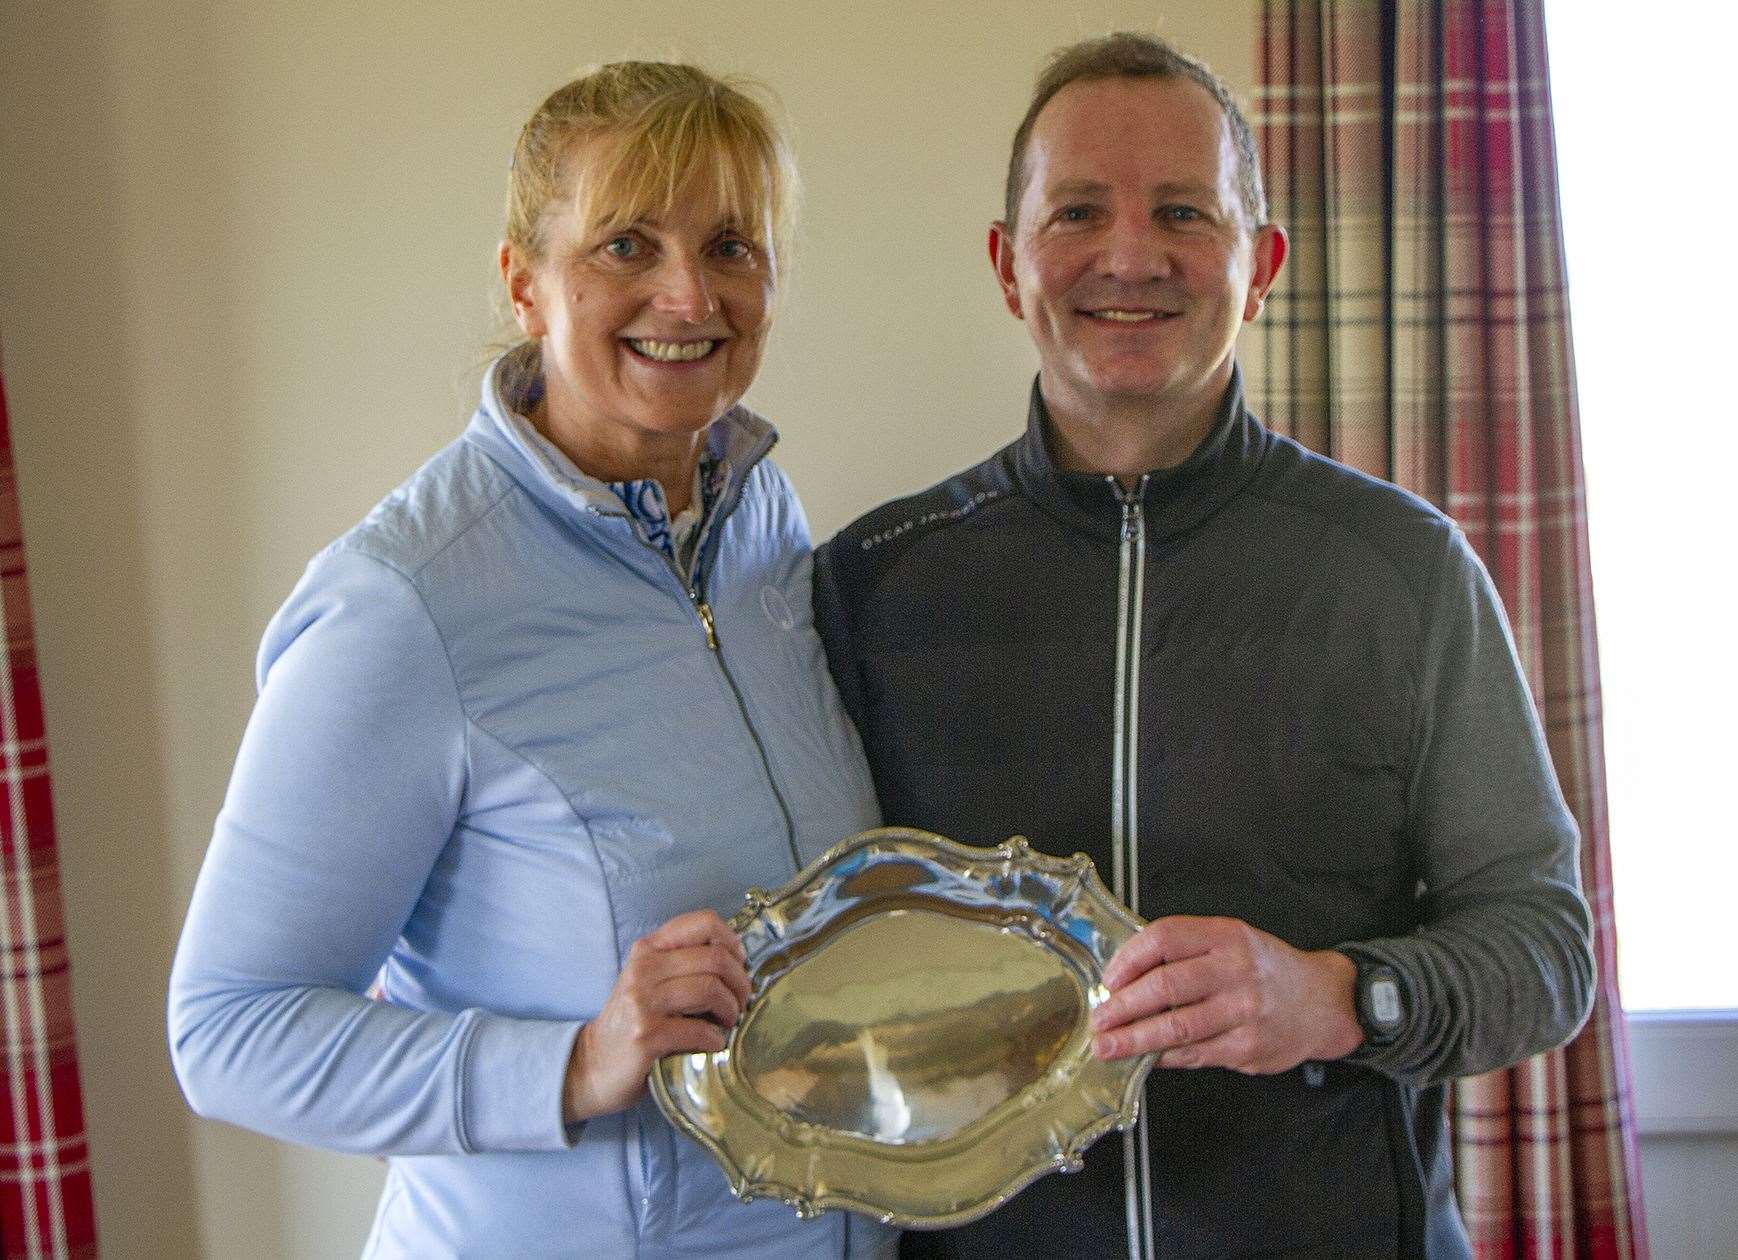 Vice-captain Carol Paterson receives the trophy from captain Andy Bain after her side won the Captain v Vice-Captain match by a score of 6.5 to 5.5.